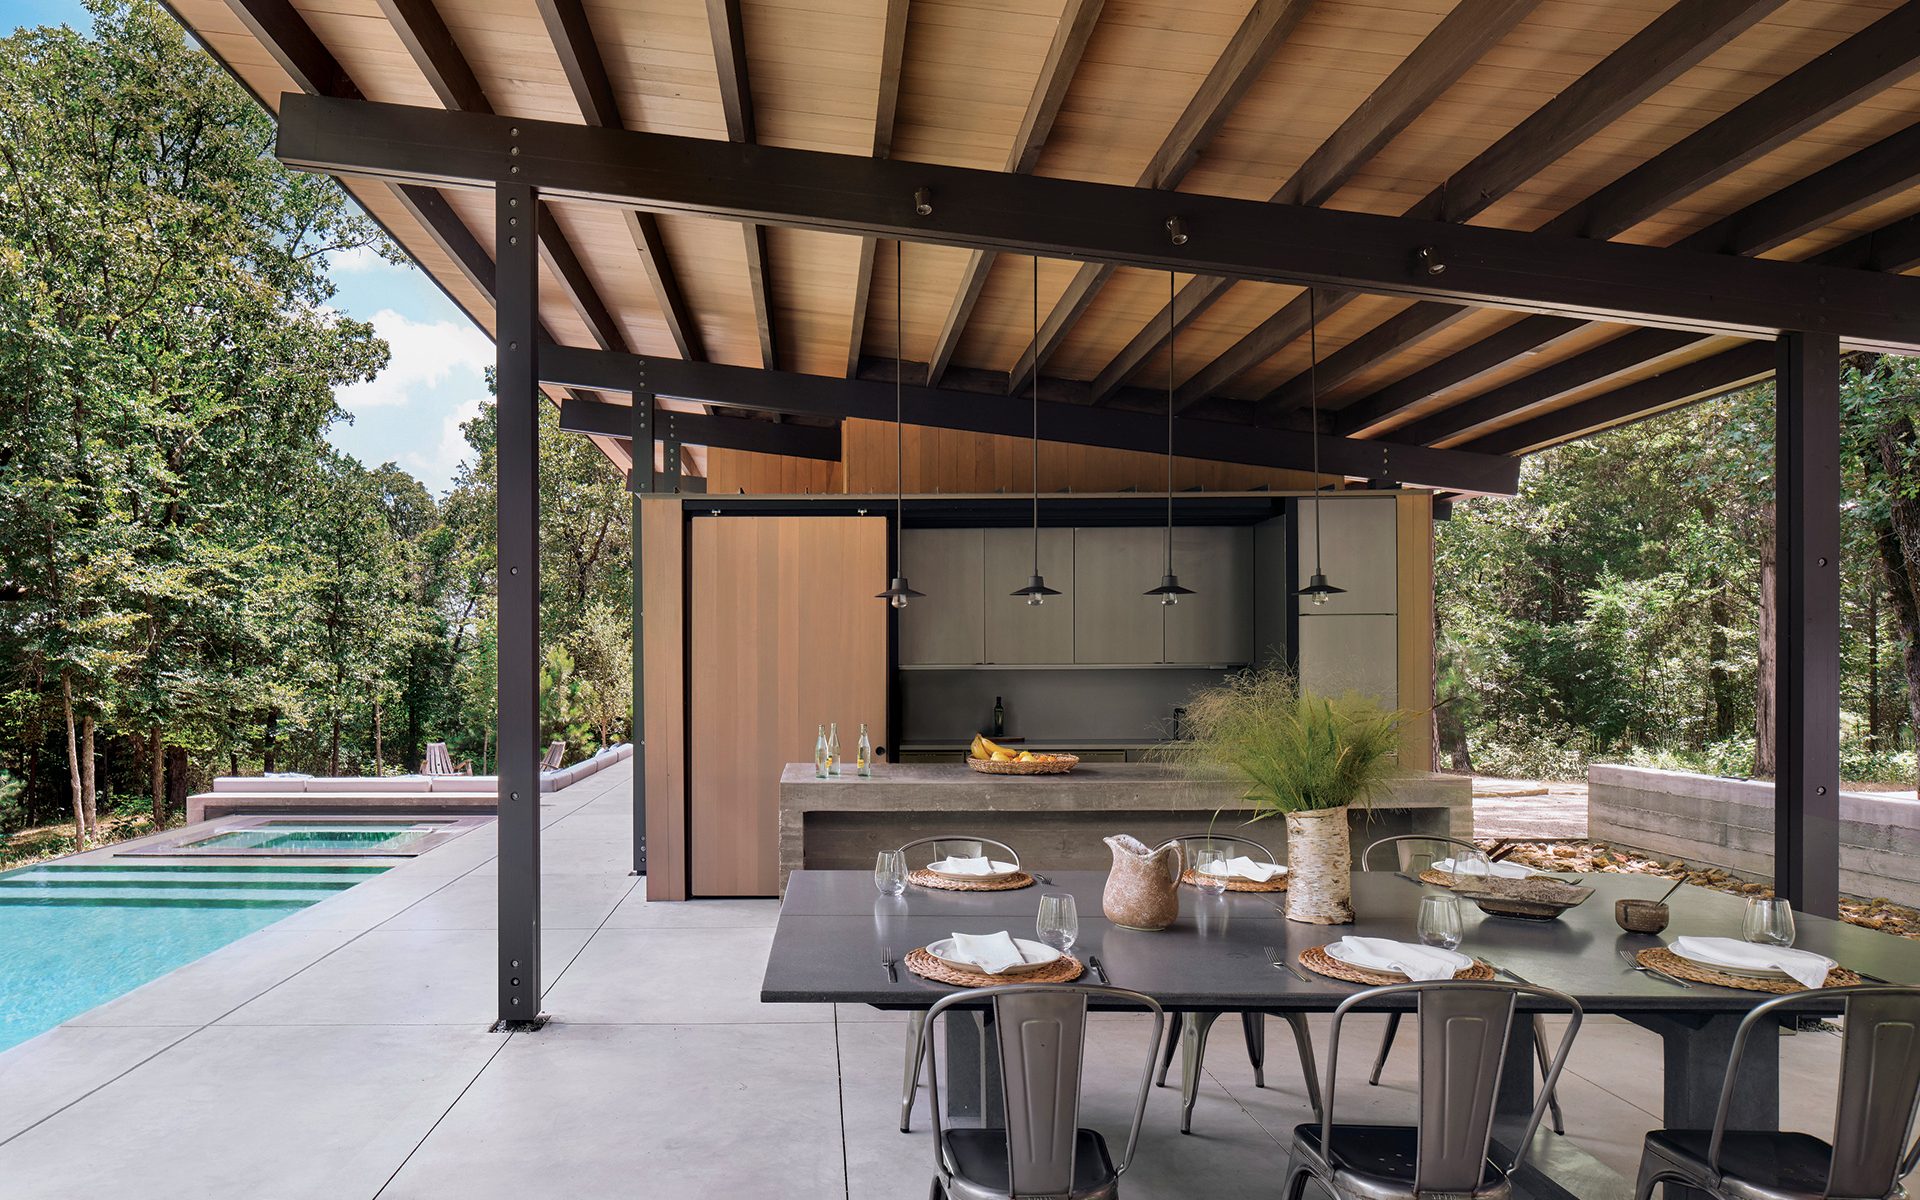 8 designers share how to create the perfect outdoor kitchen - galerie